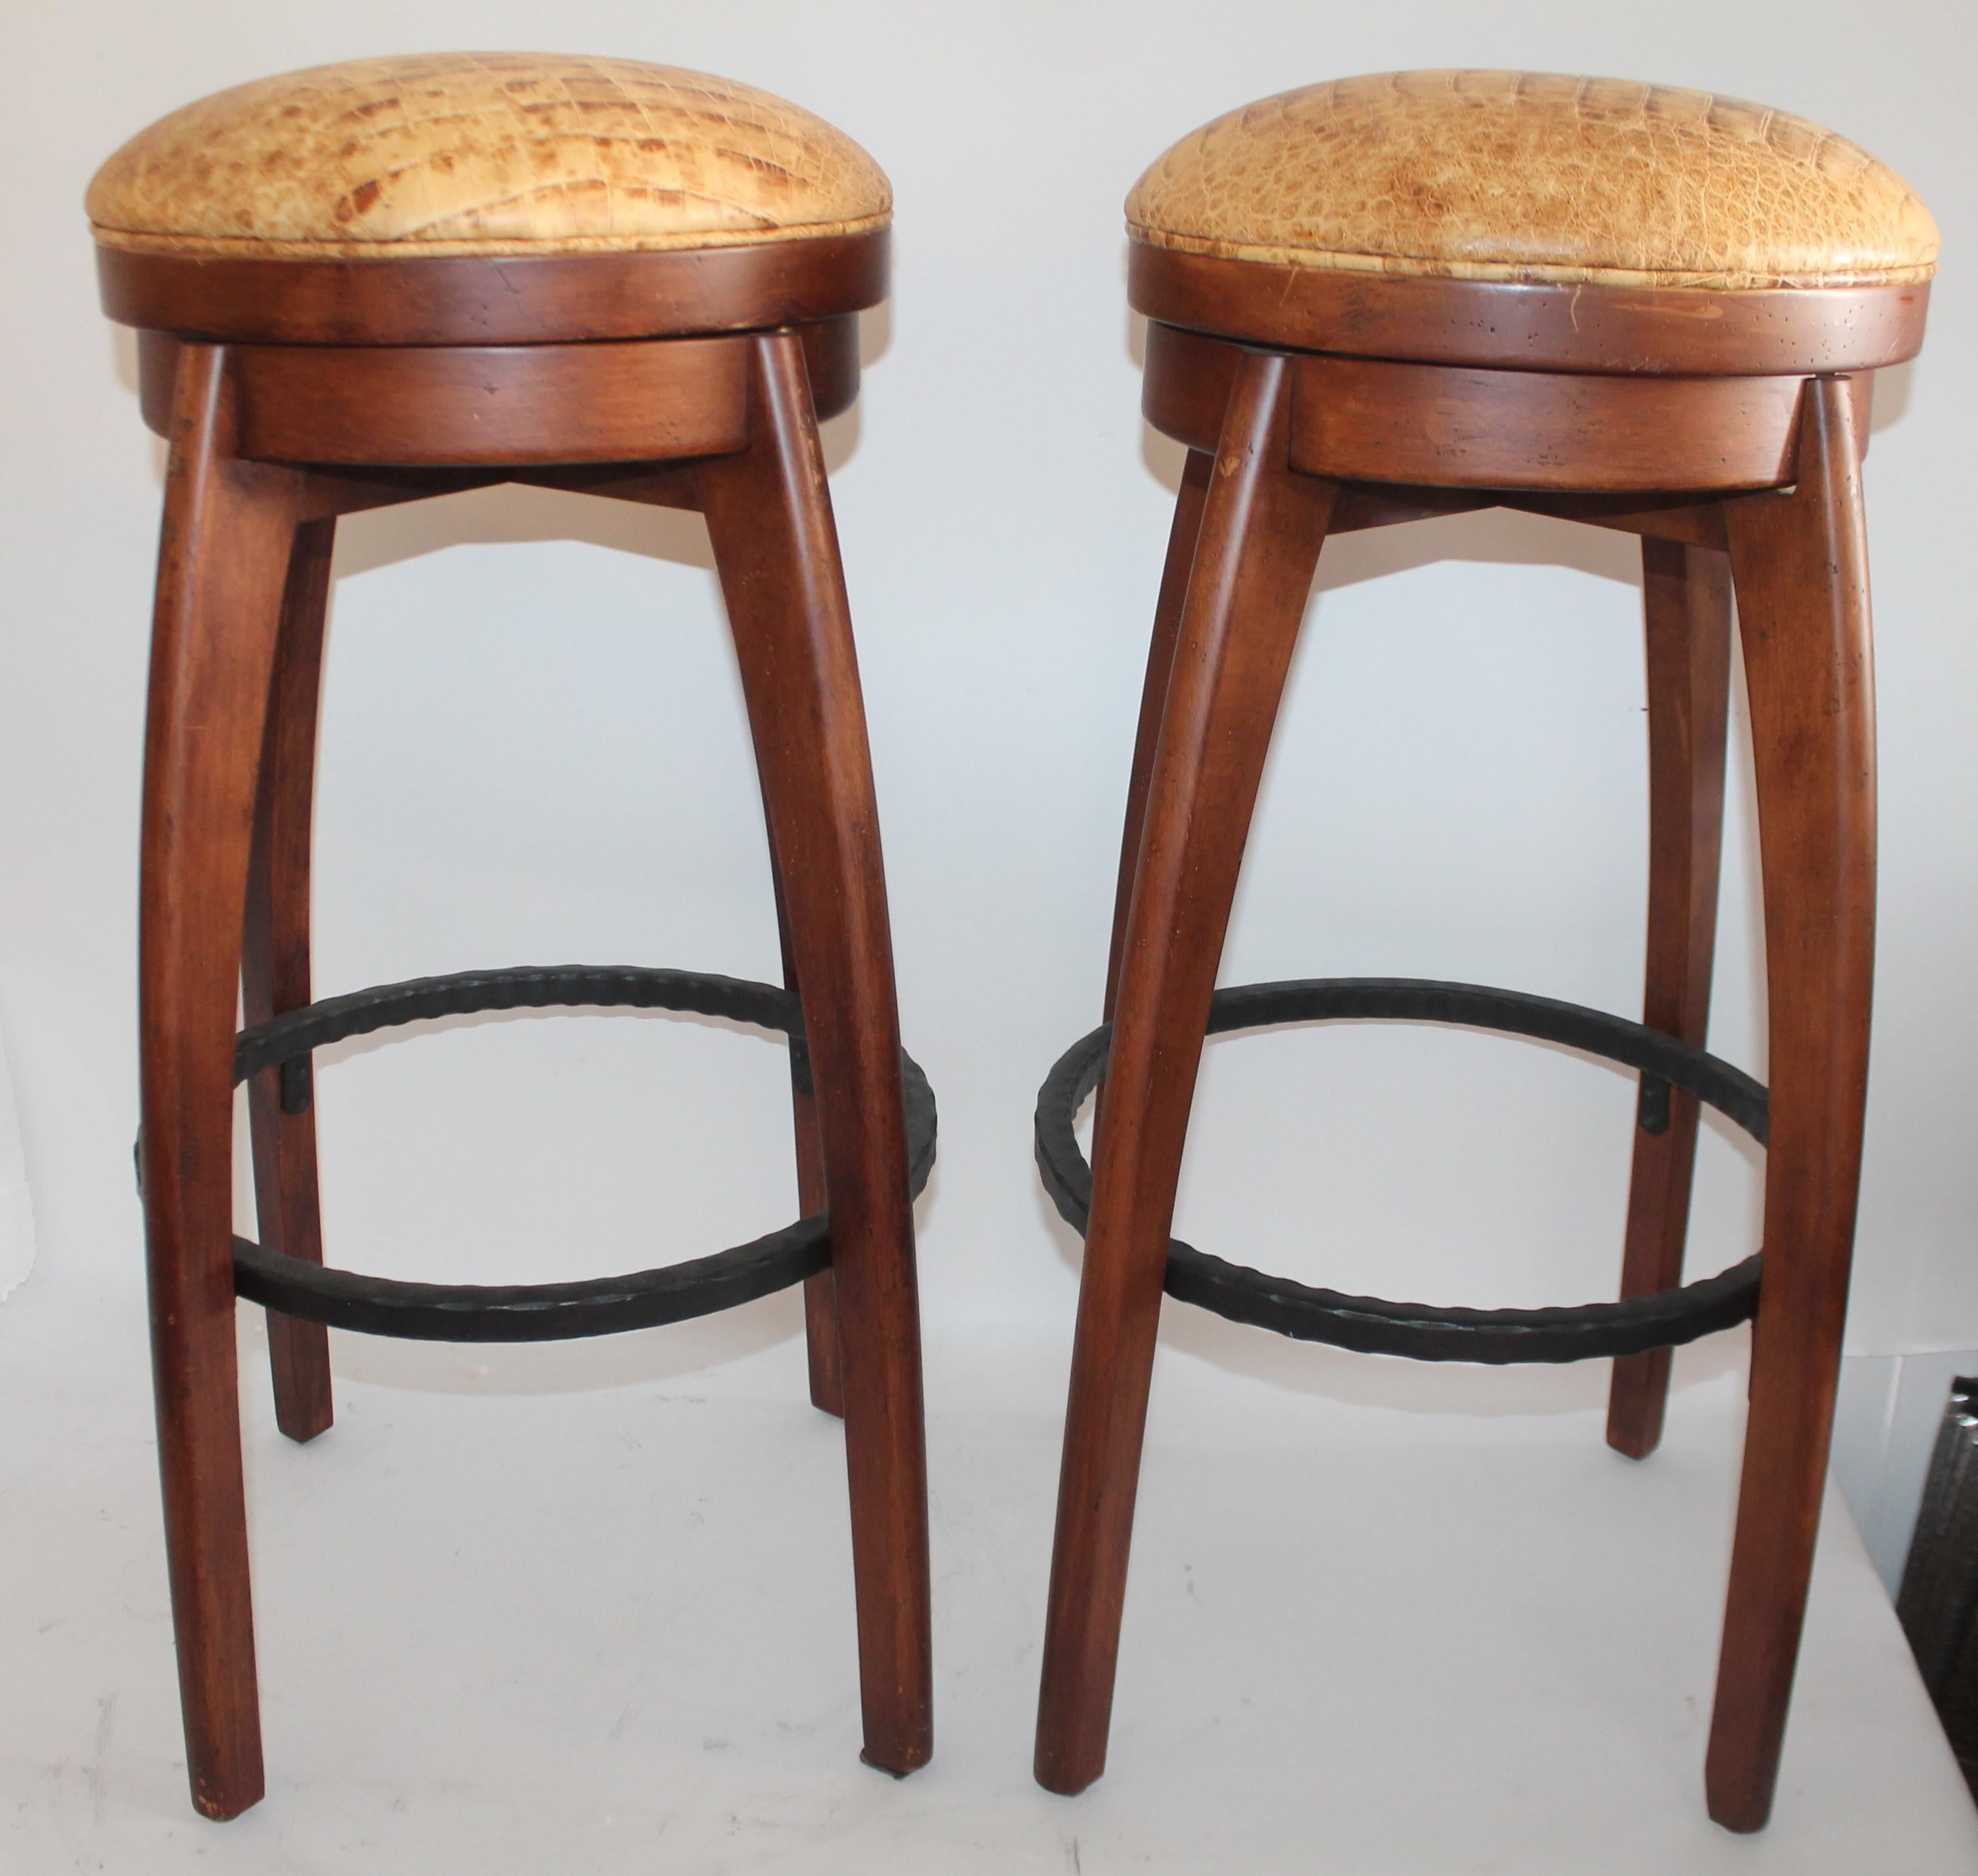 These amazing walnut framed swivel bar stools are in fantastic condition and have leather seat cushions.